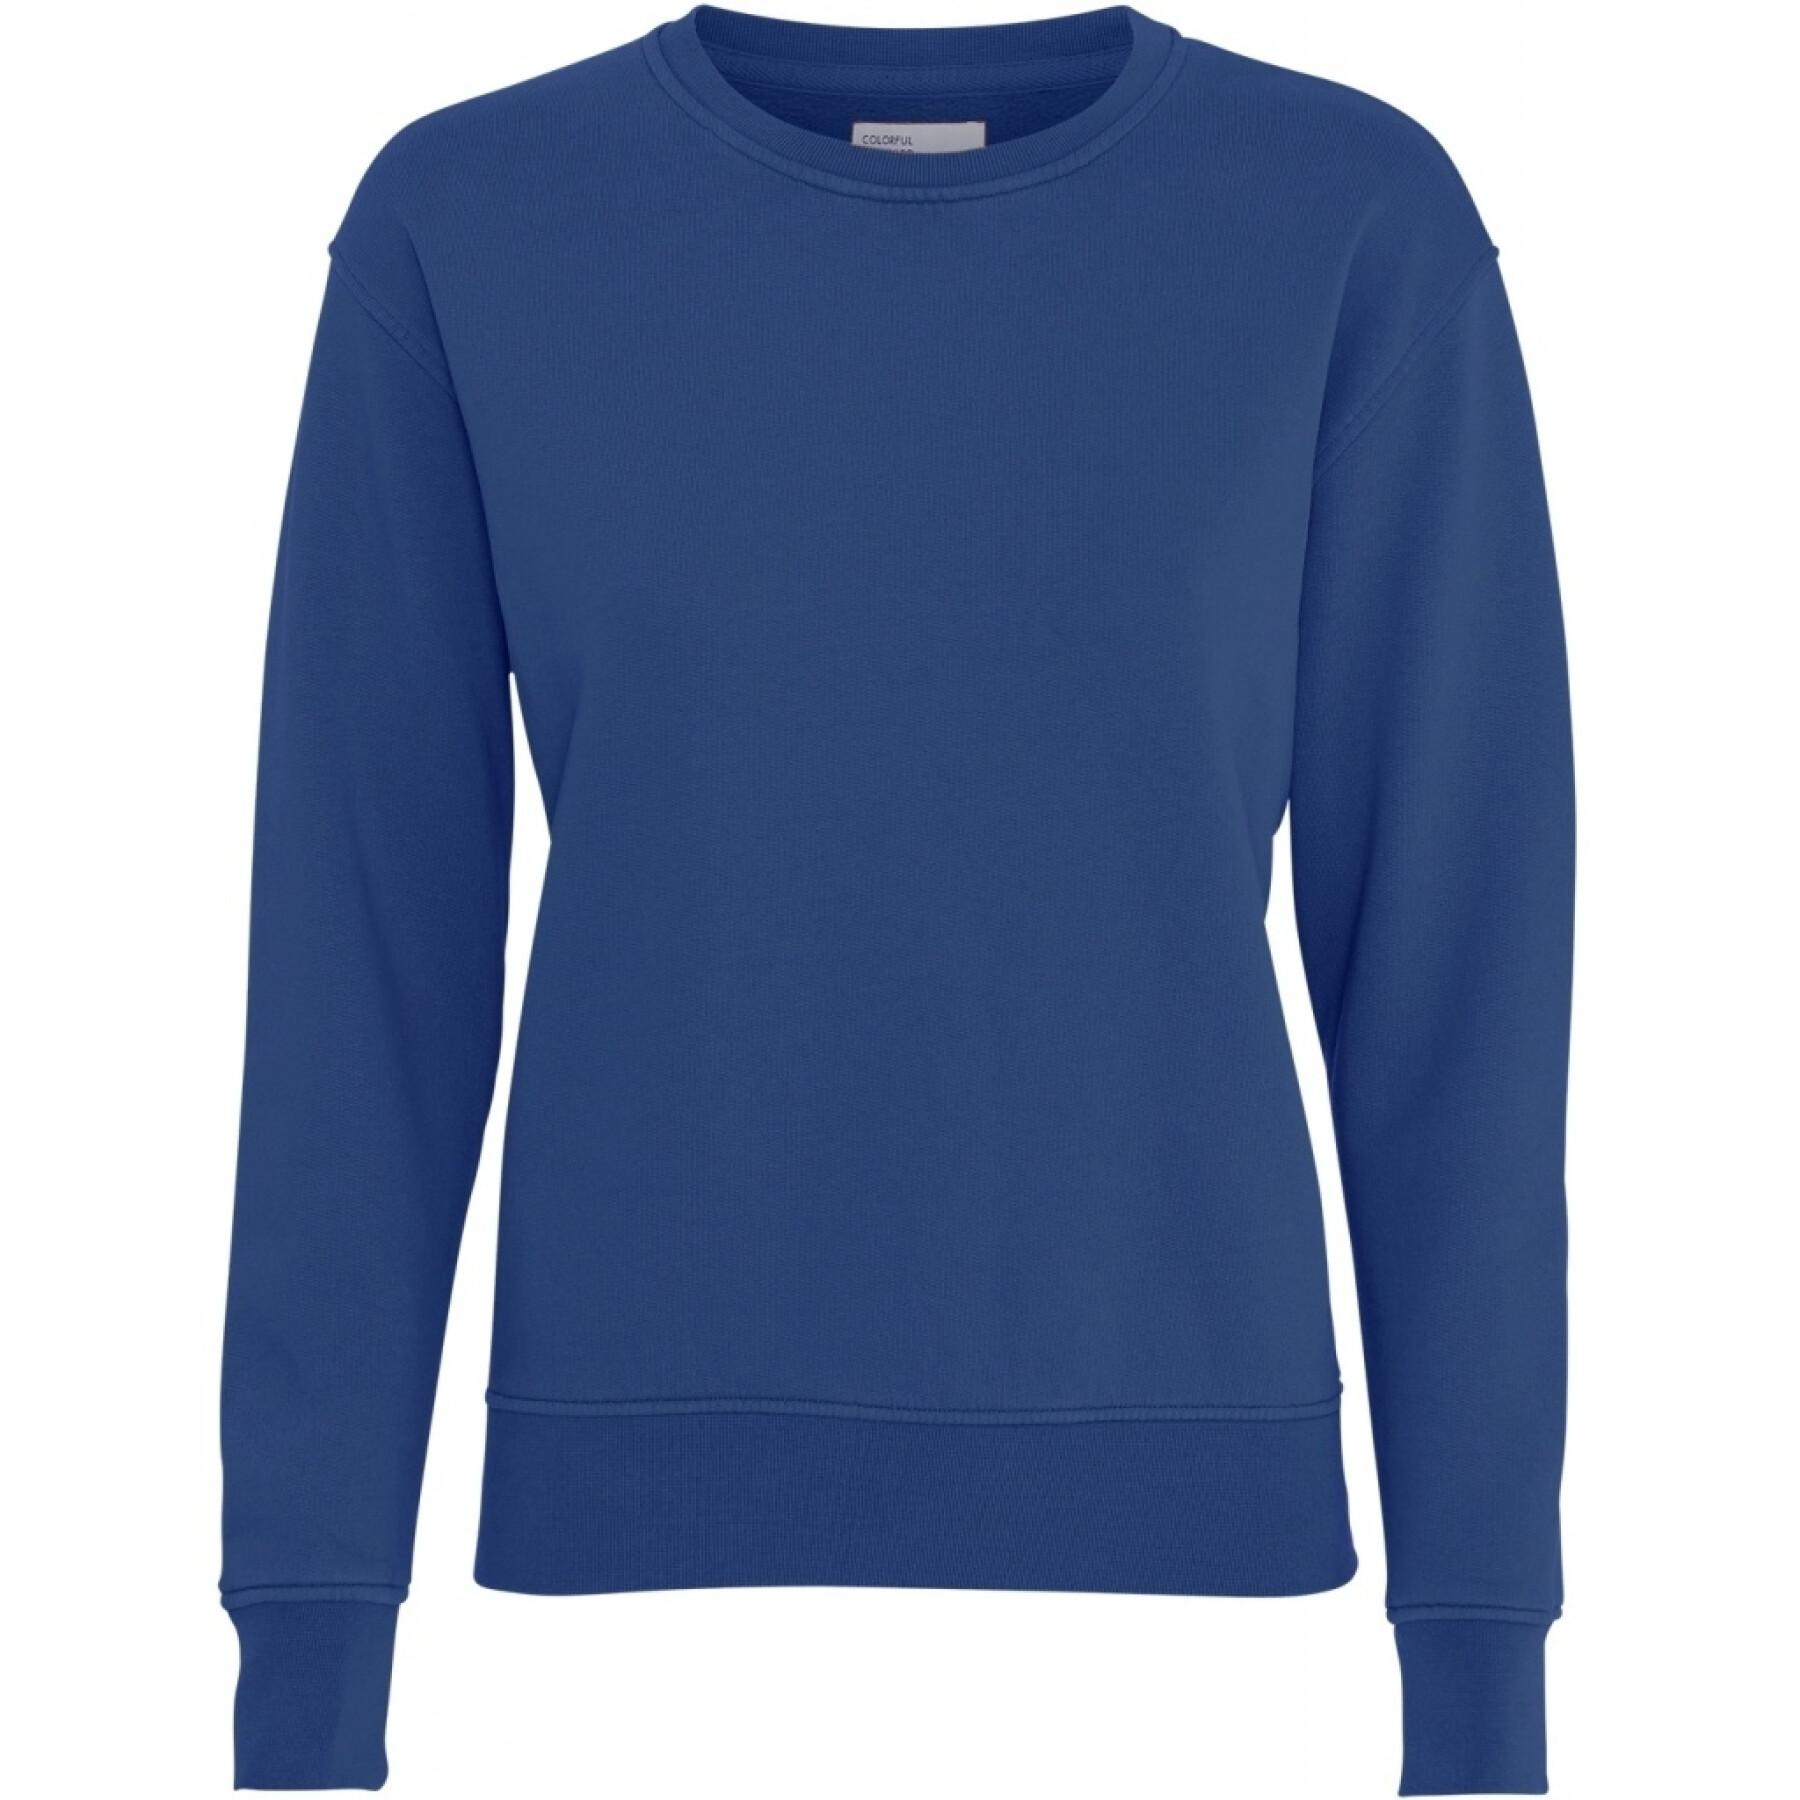 Women's round neck sweater Colorful Standard Classic Organic royal blue